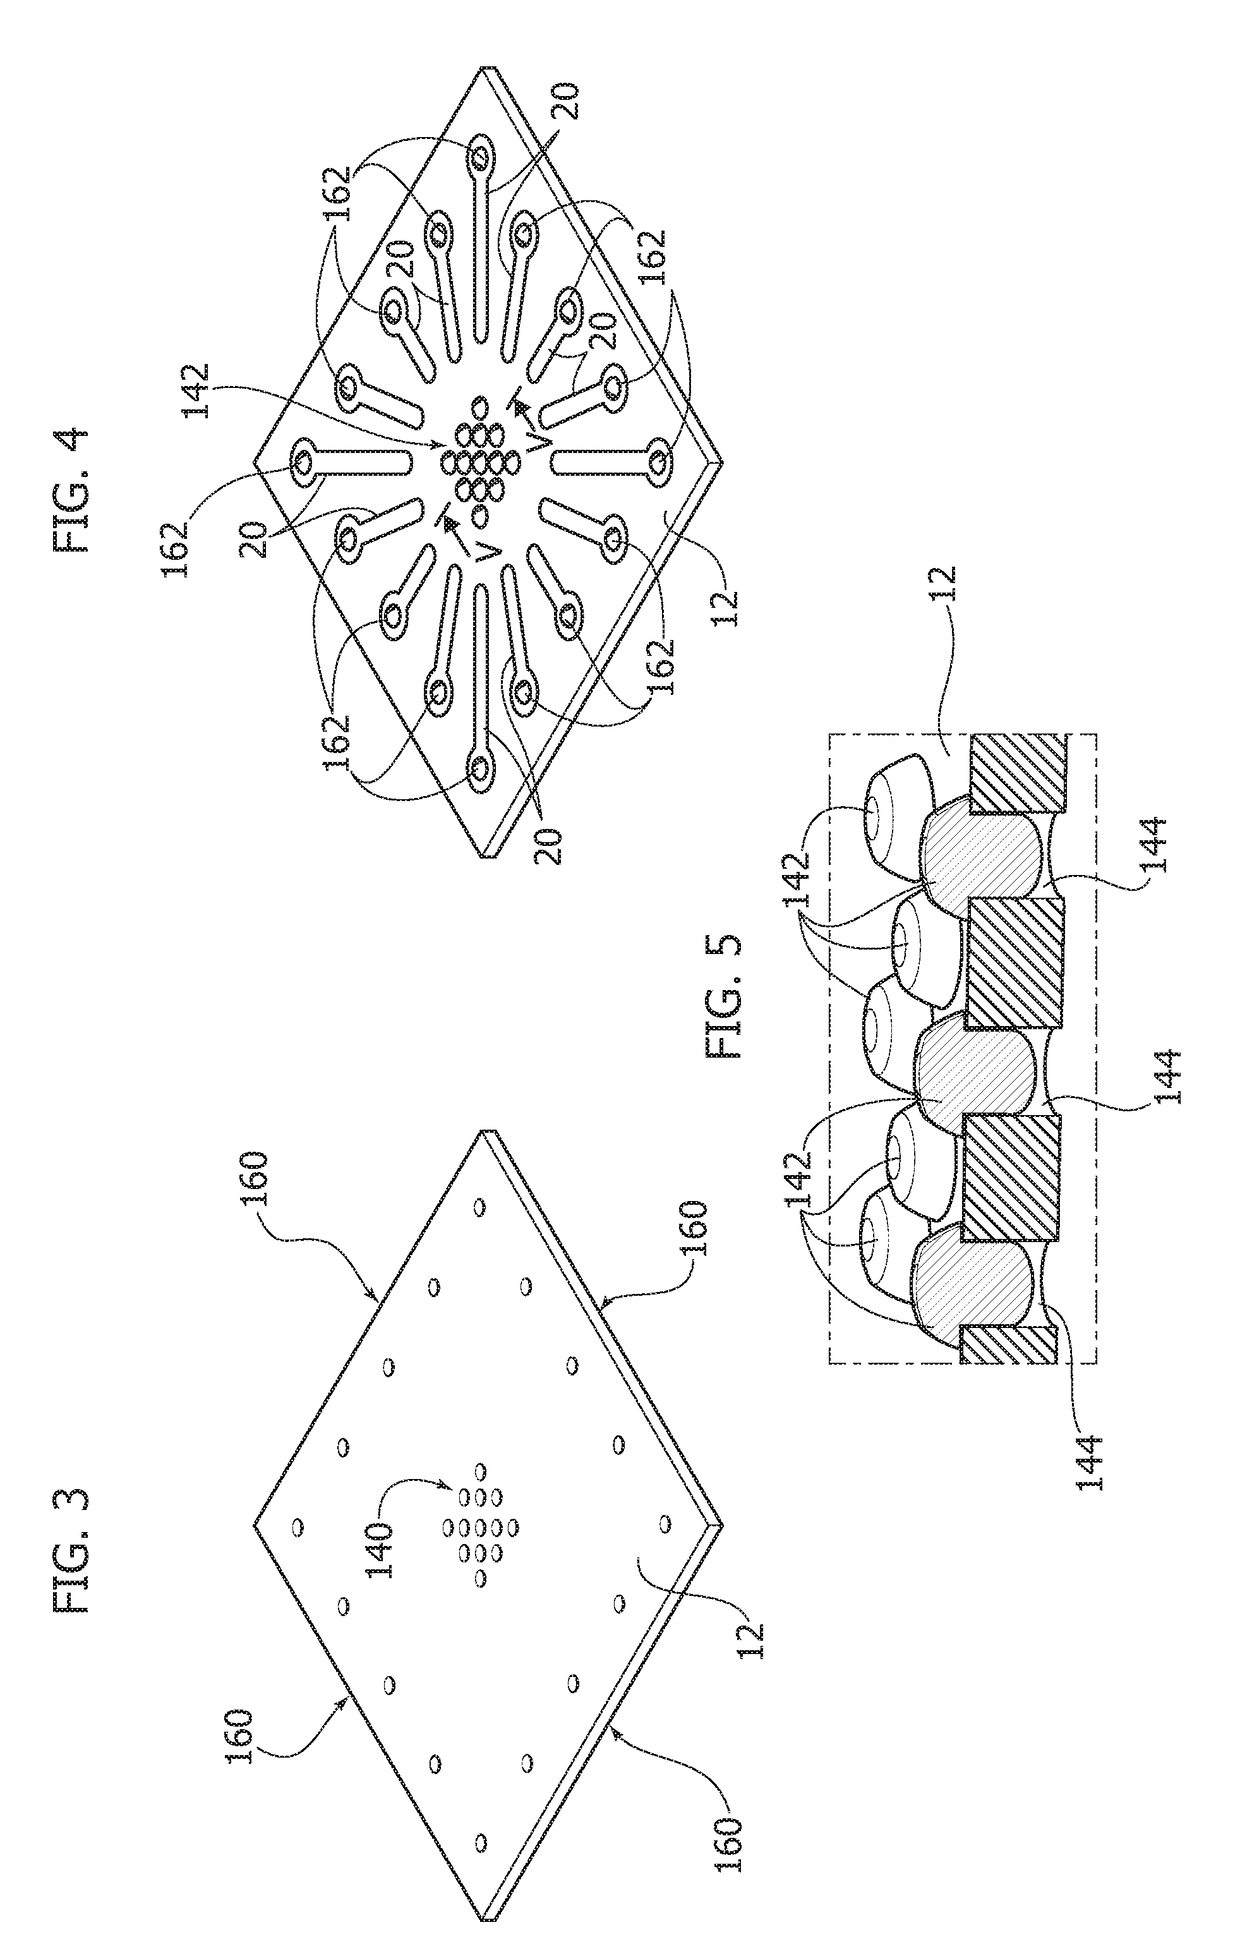 Semiconductor product and corresponding method